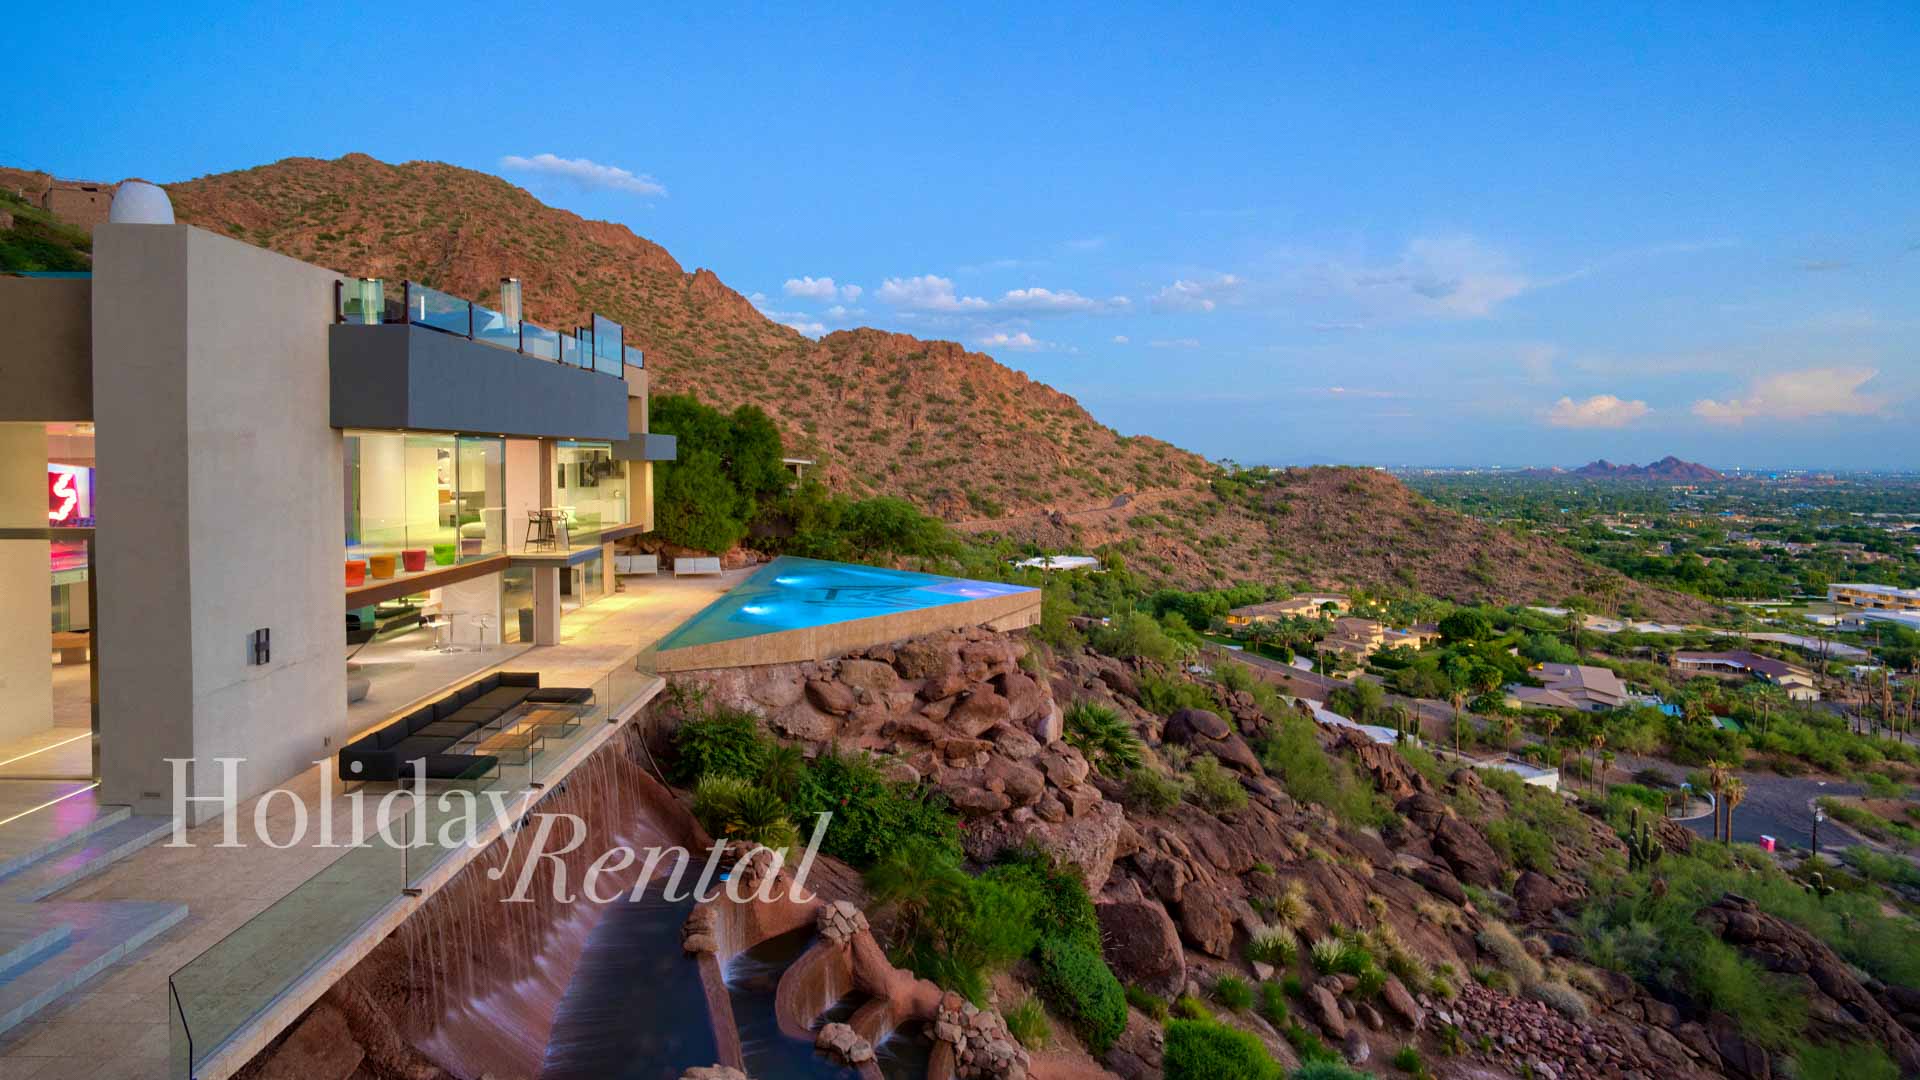 Experience a one-of-a-kind luxury vacation at this modern villa